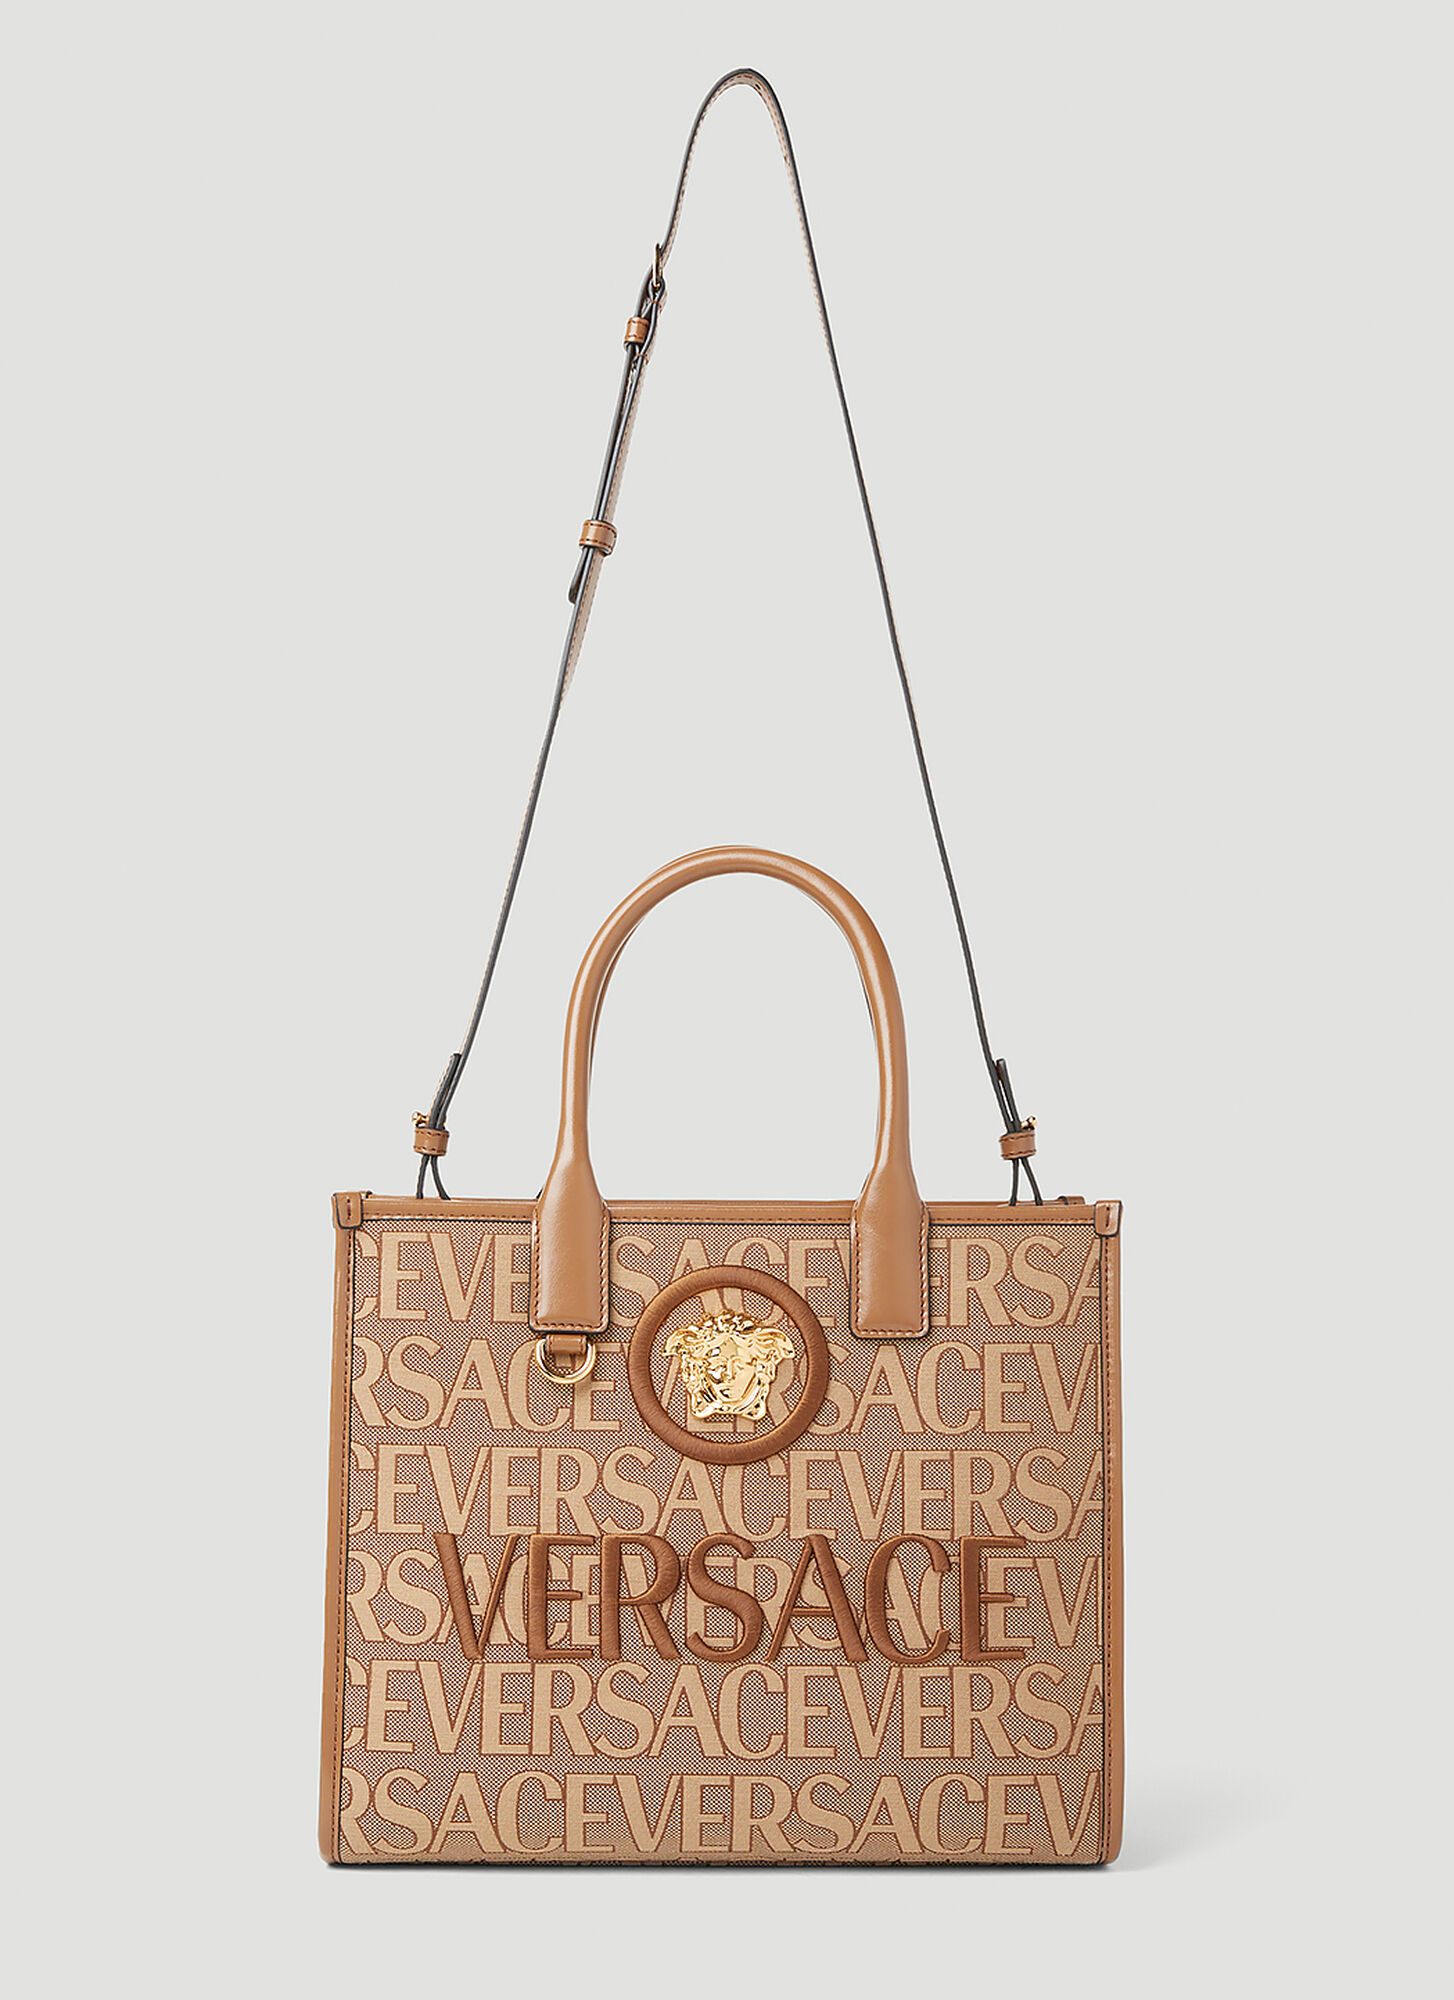 versace Versace Allover Small Tote Bag available on